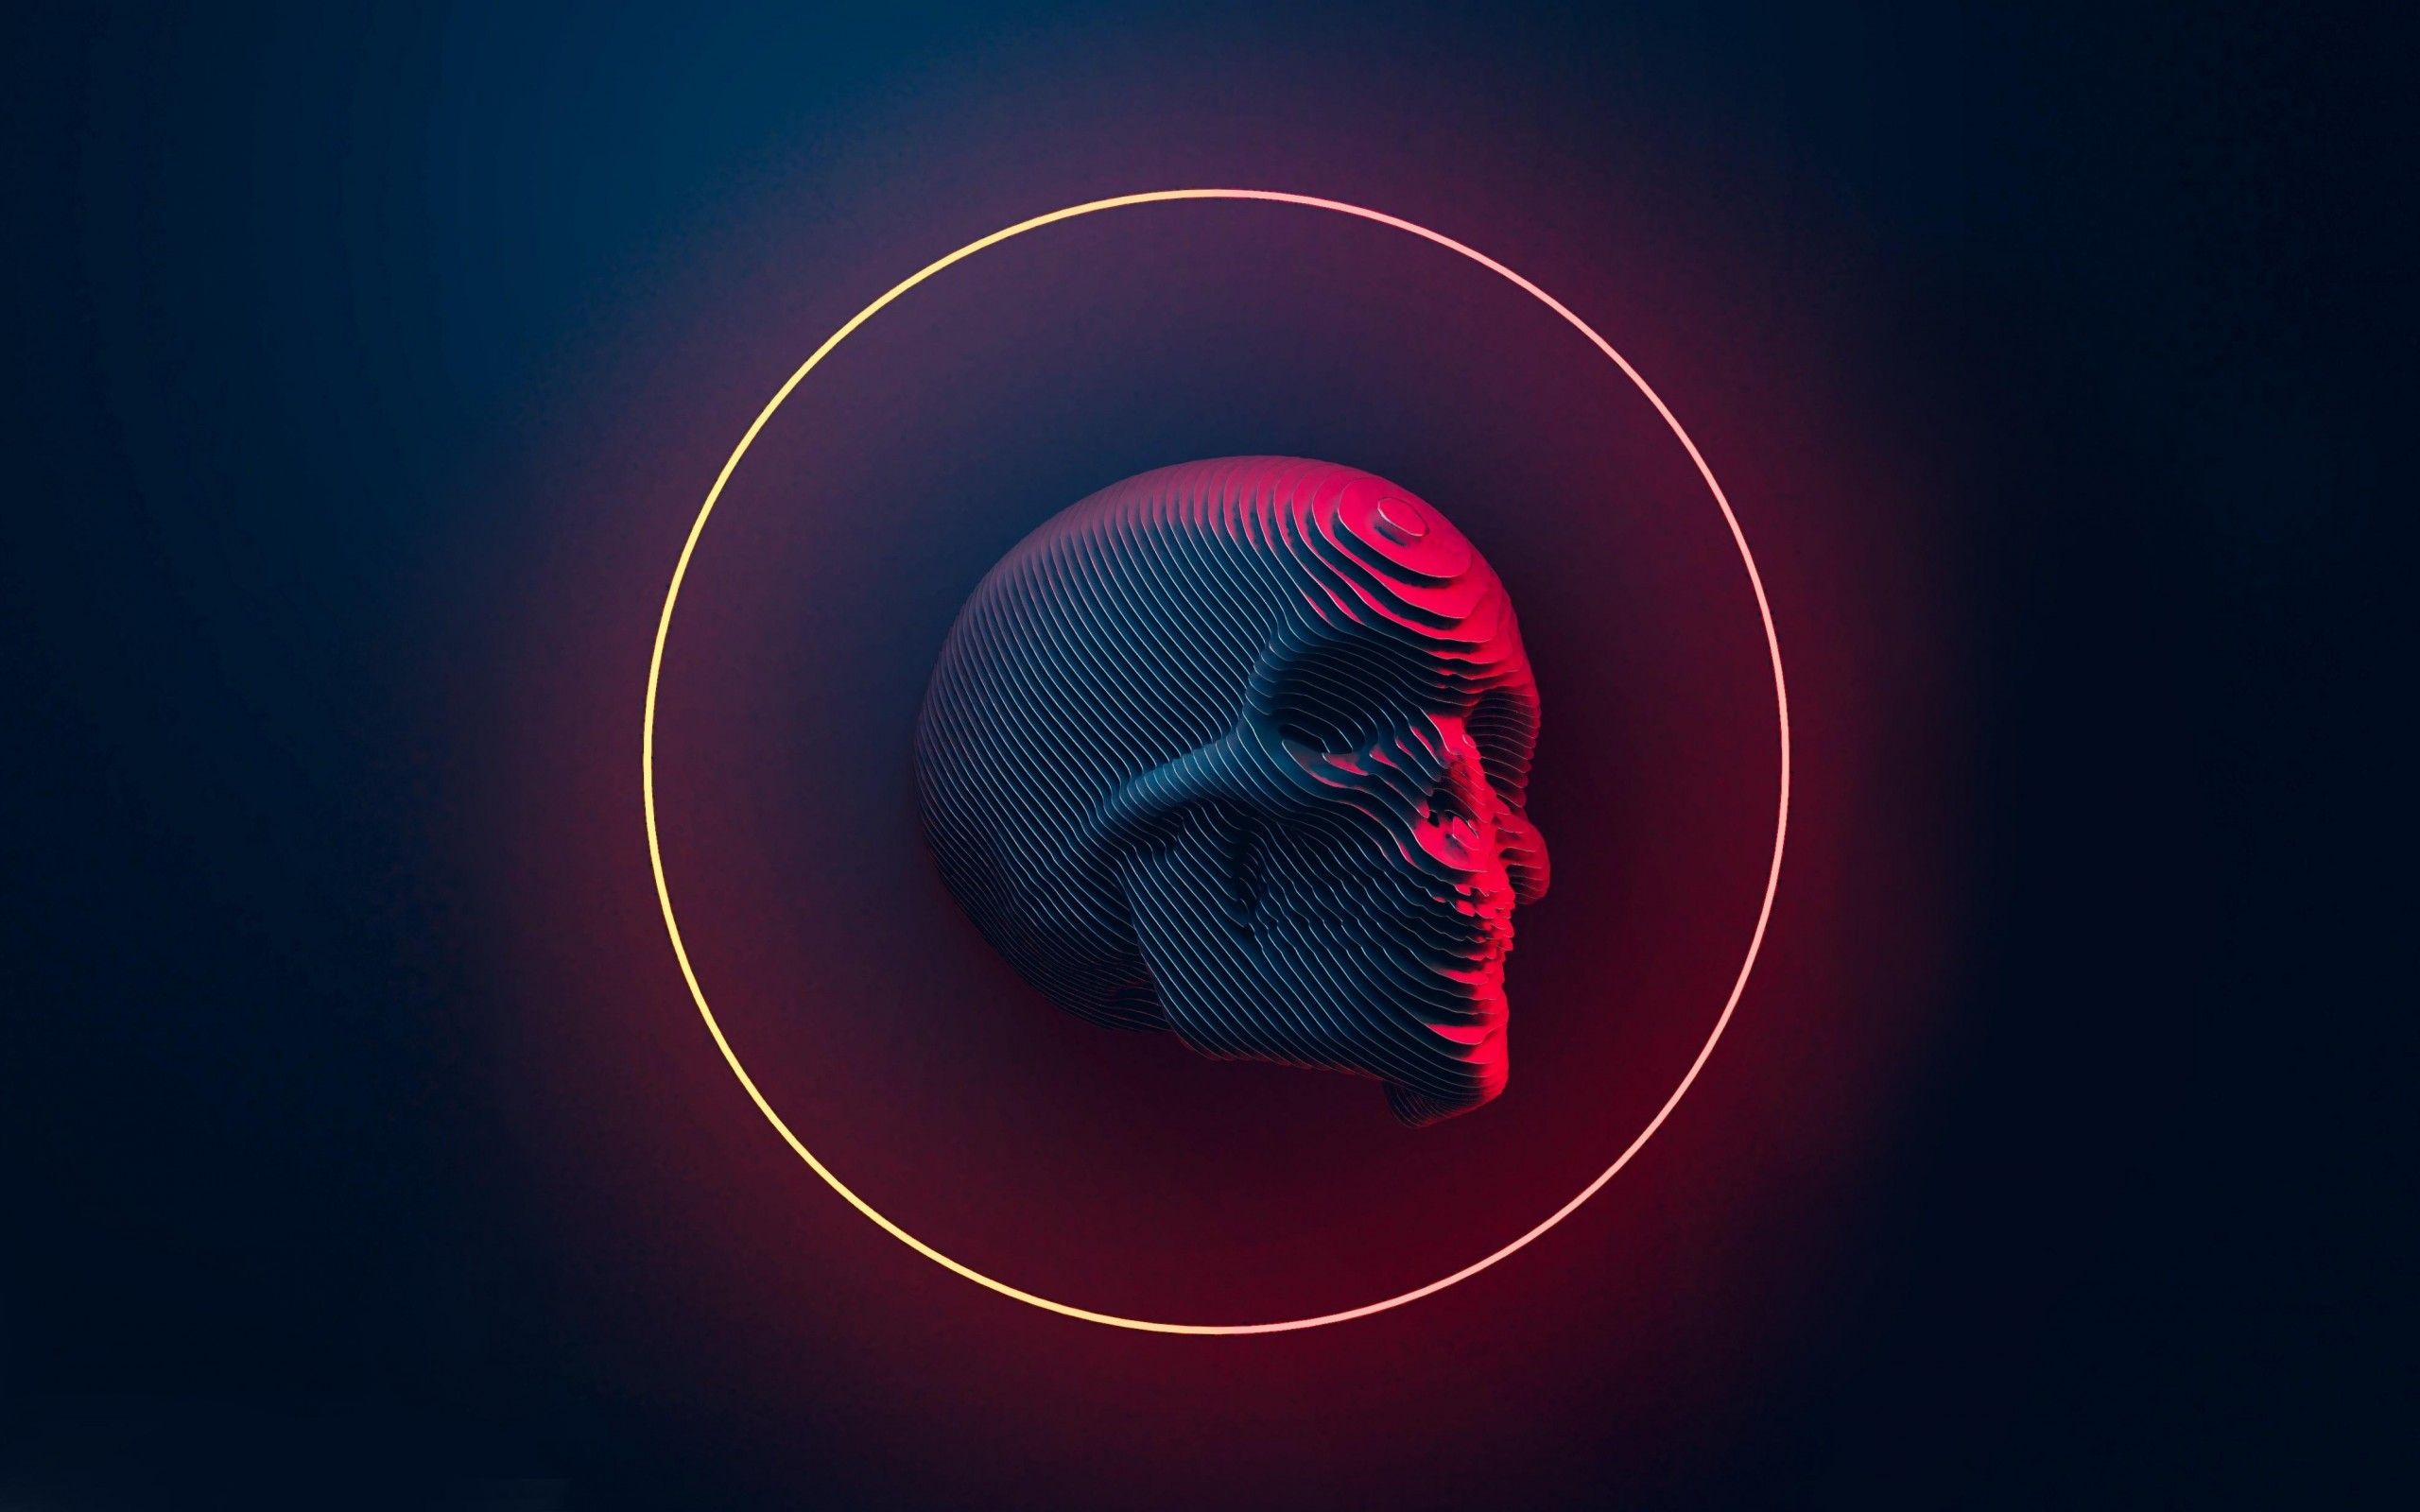 Just Another Skull 4K Wallpaper 2560x1600 Hot Desktop and background for your PC and mobile